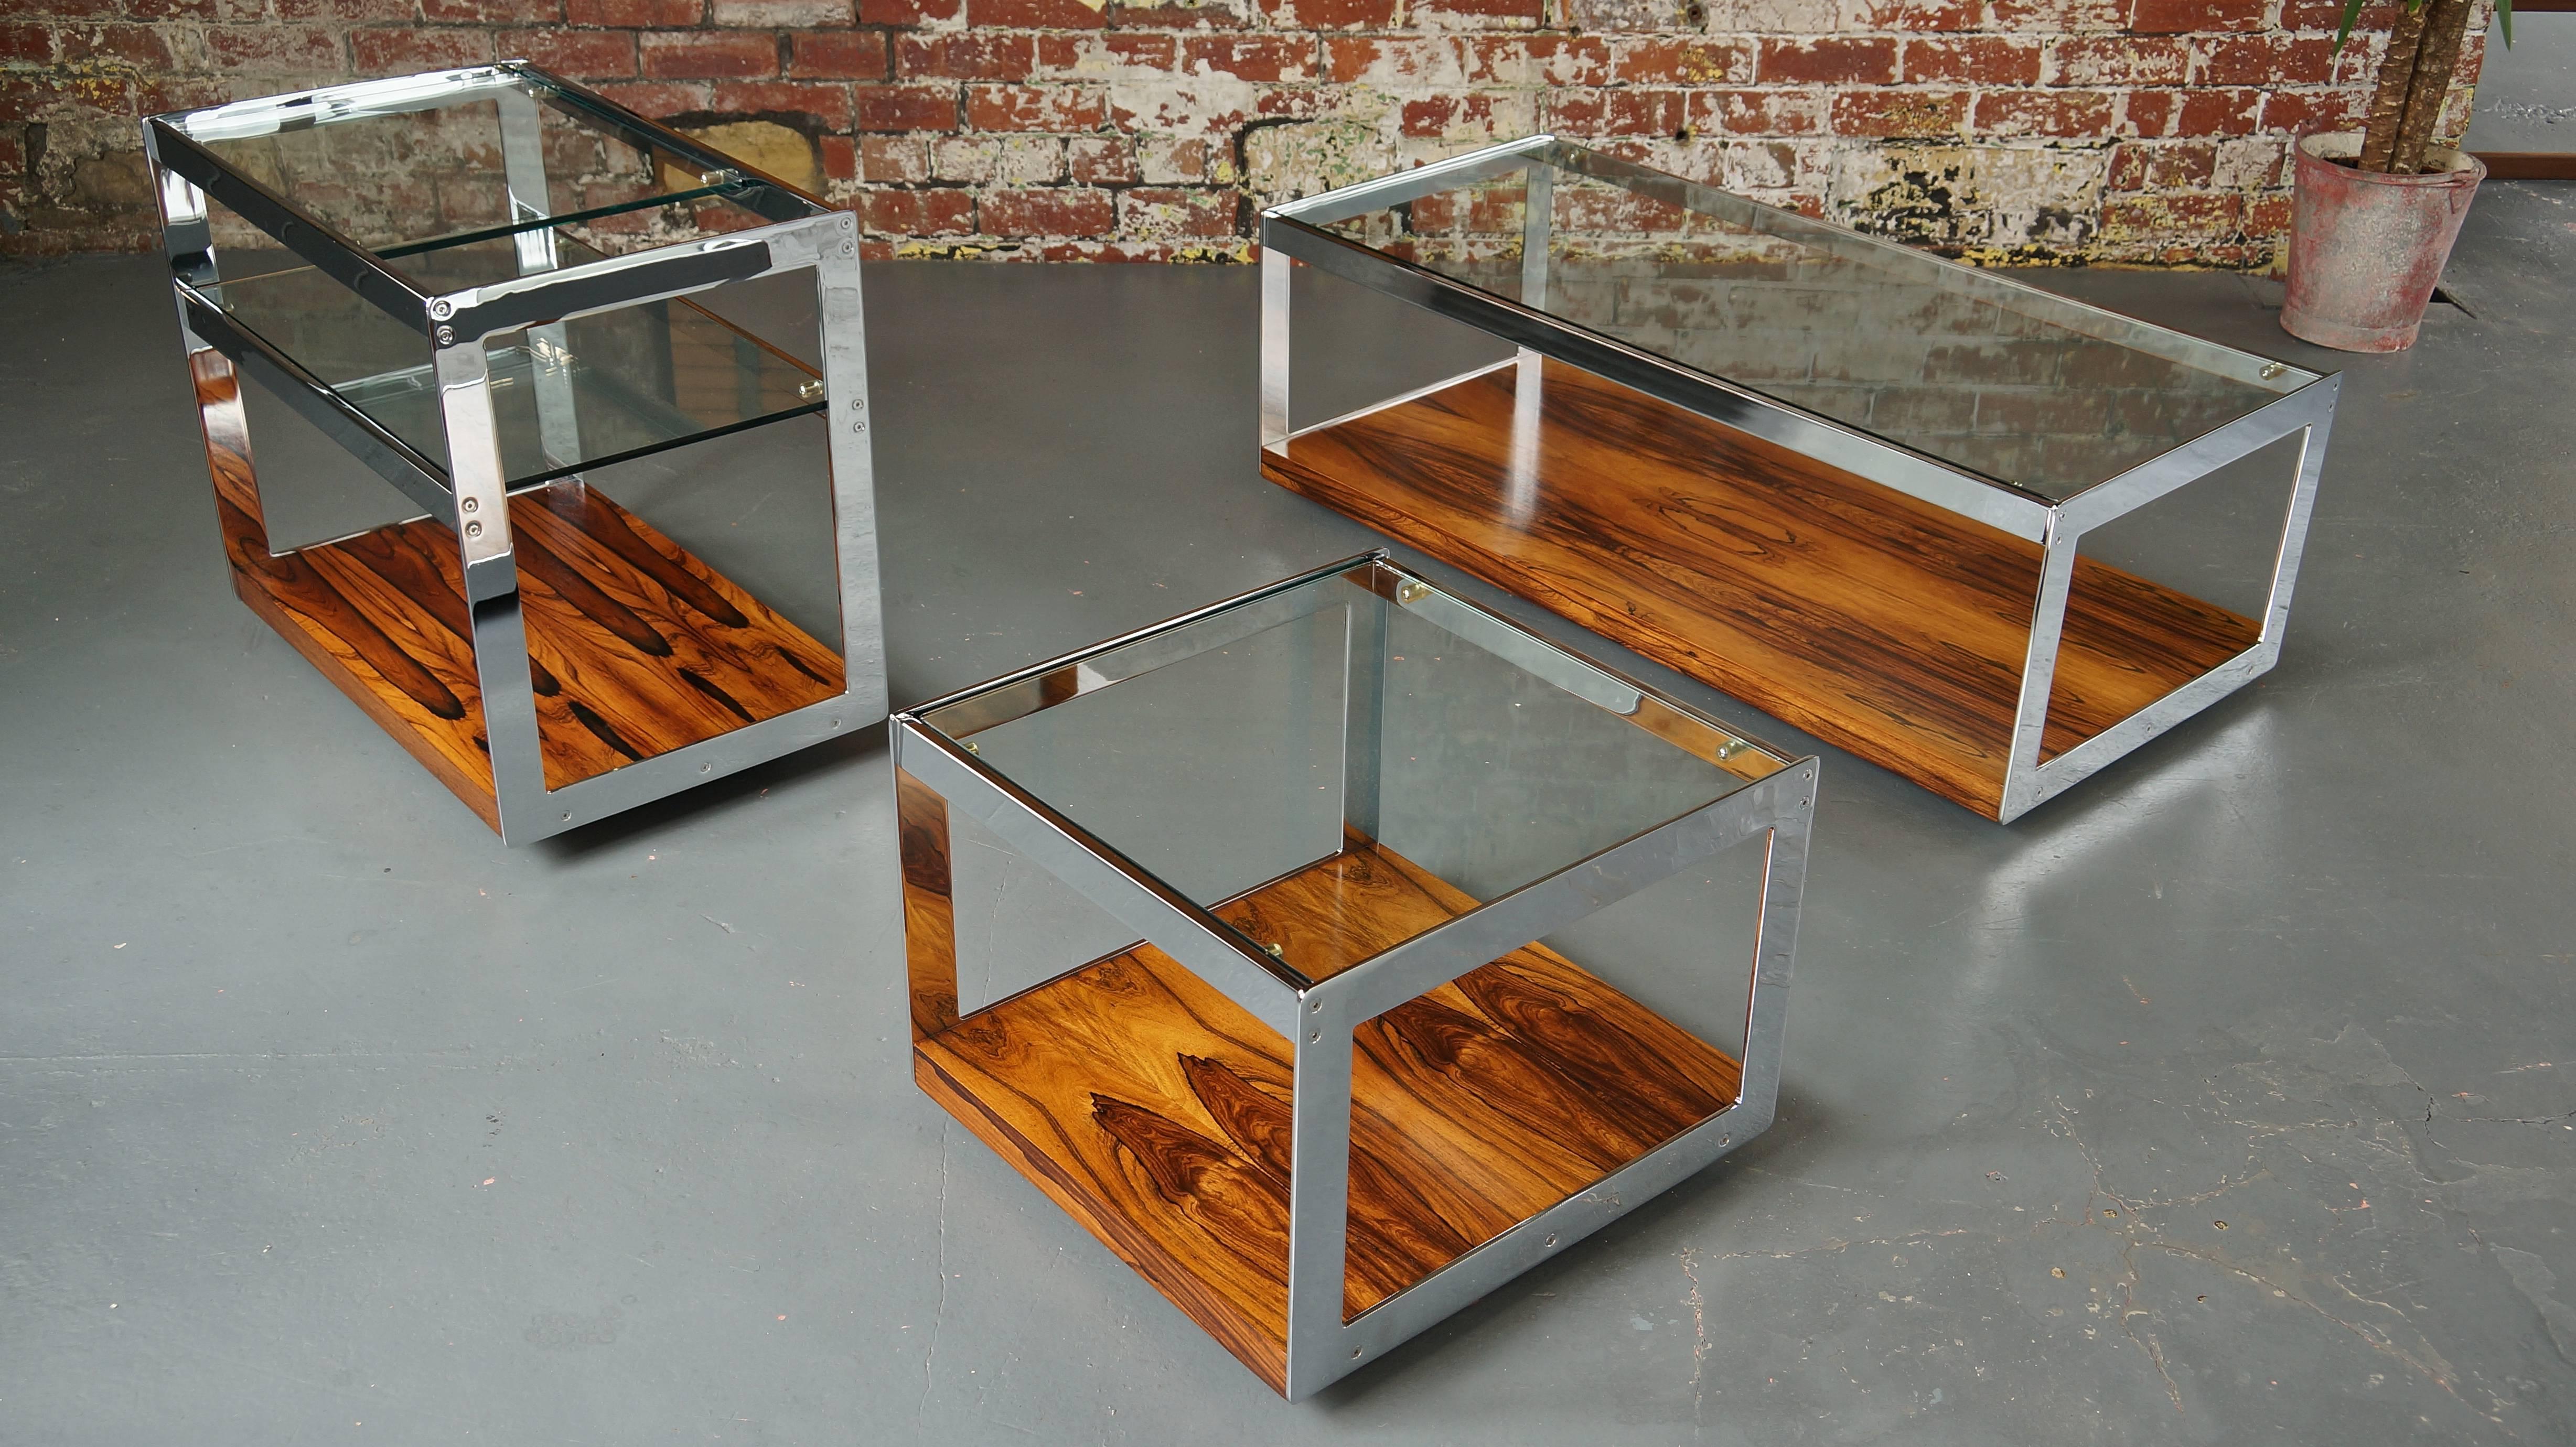 Vintage Chrome and Rosewood Coffee Table by Richard Young for Merrow Associates For Sale 1